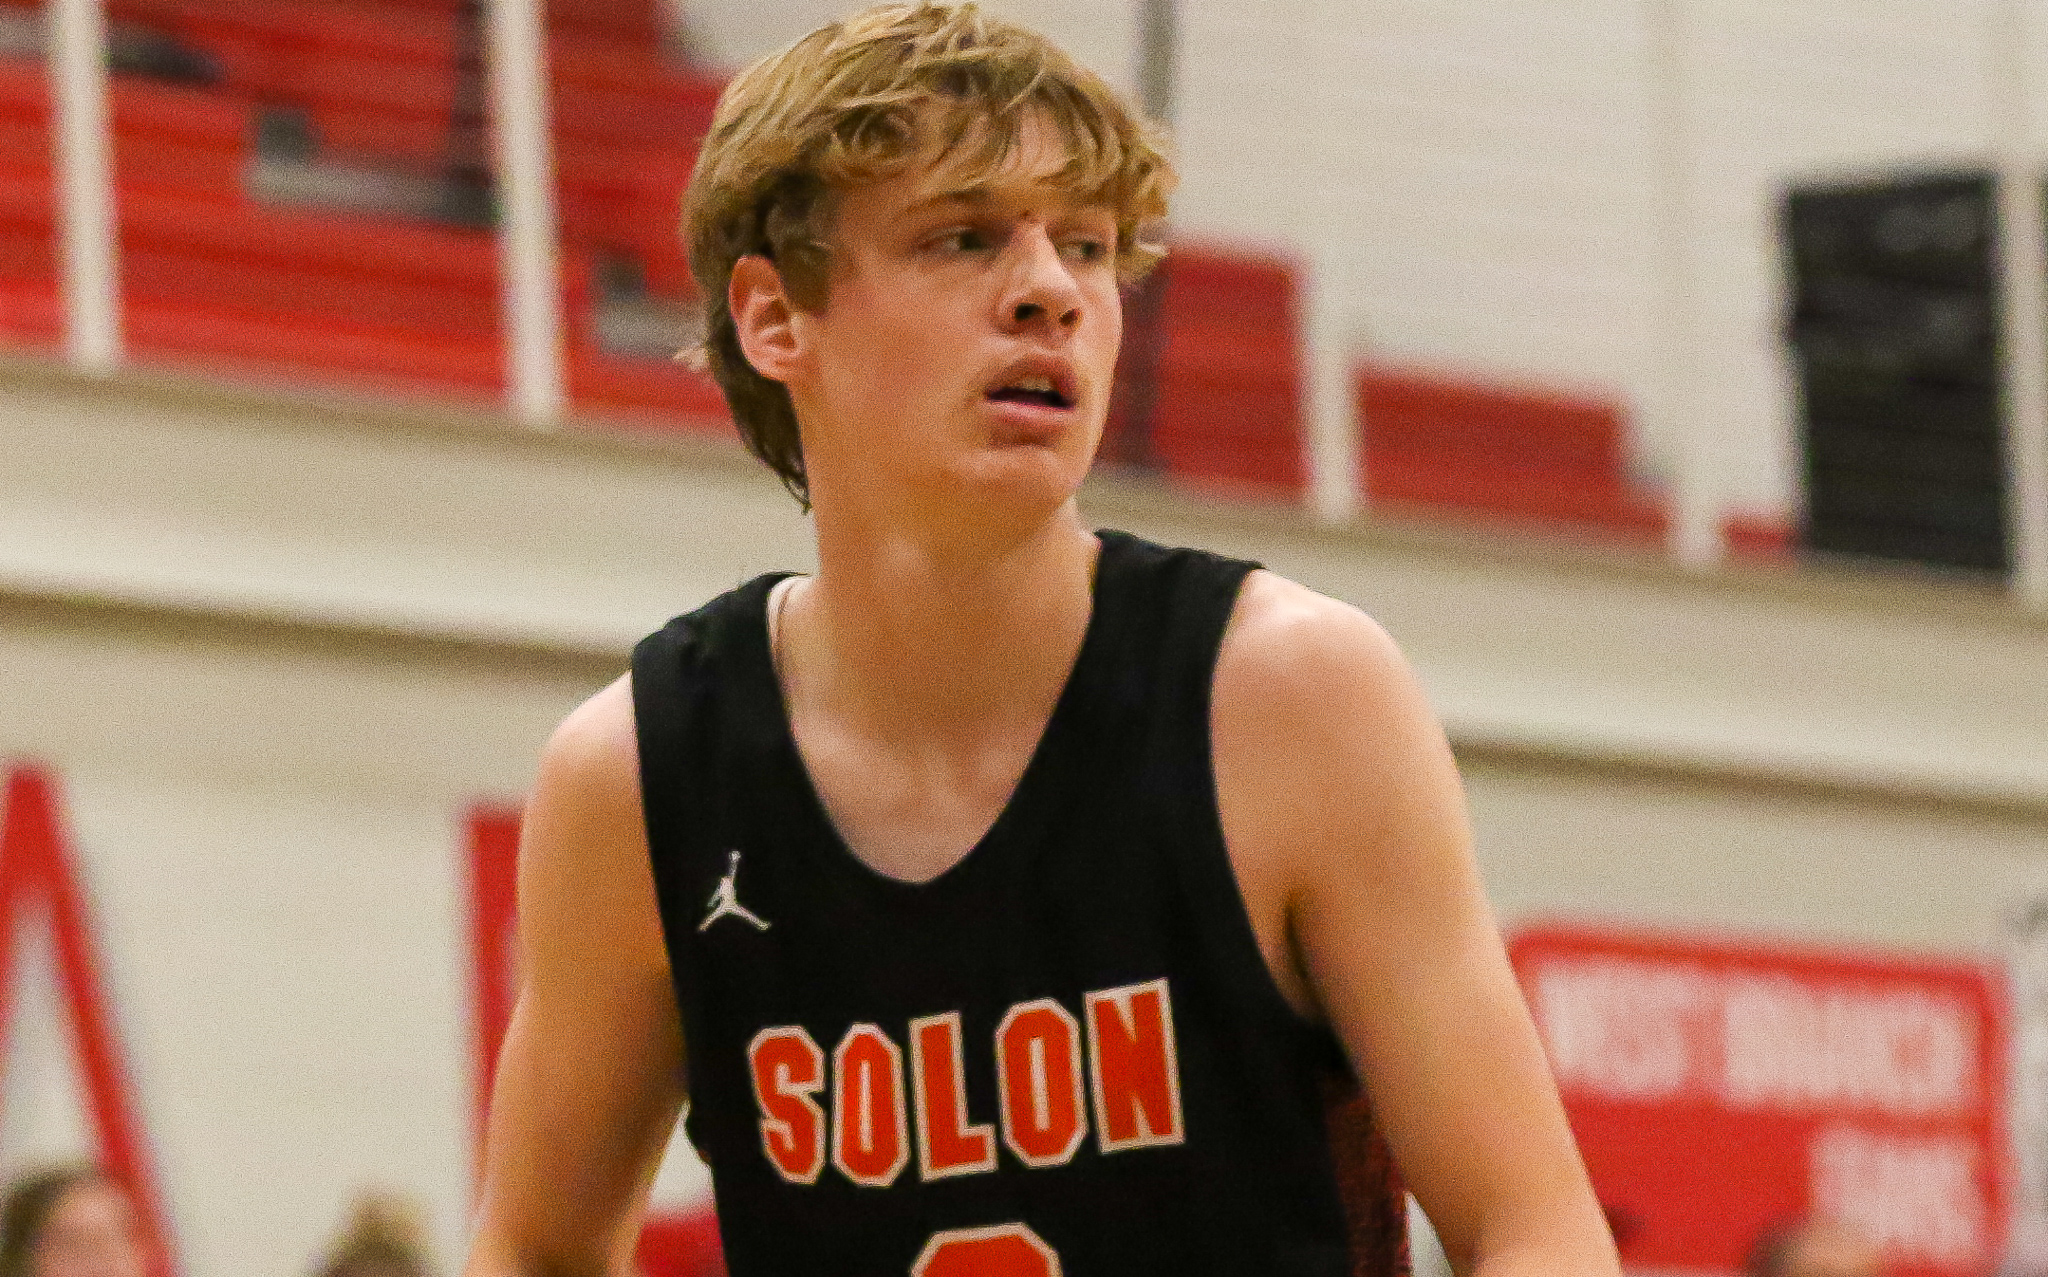 <span class="pn-tooltip pn-player-link">
        <span class="name-pointer">Scouting Report: Solon at West Branch</span>
        <span class="info-box not-prose" style="background: linear-gradient(to bottom, rgba(247,101,23, 0.95) 0%,rgba(247,101,23, 1) 100%)">
            <a href="https://prephoops.com/2022/12/scouting-report-solon-at-west-branch/" class="link-wrap">
                                    <span class="player-img"><img src="https://prephoops.com/wp-content/uploads/sites/2/2022/12/137A7317.jpg?w=150&h=150&crop=1" alt="Scouting Report: Solon at West Branch"></span>
                
                <span class="player-details">
                    <span class="first-name">Scouting</span>
                    <span class="last-name">Report: Solon at West Branch</span>
                    <span class="measurables">
                                            </span>
                                    </span>
                <span class="player-rank">
                                                        </span>
                                    <span class="state-abbr"></span>
                            </a>

            
        </span>
    </span>
